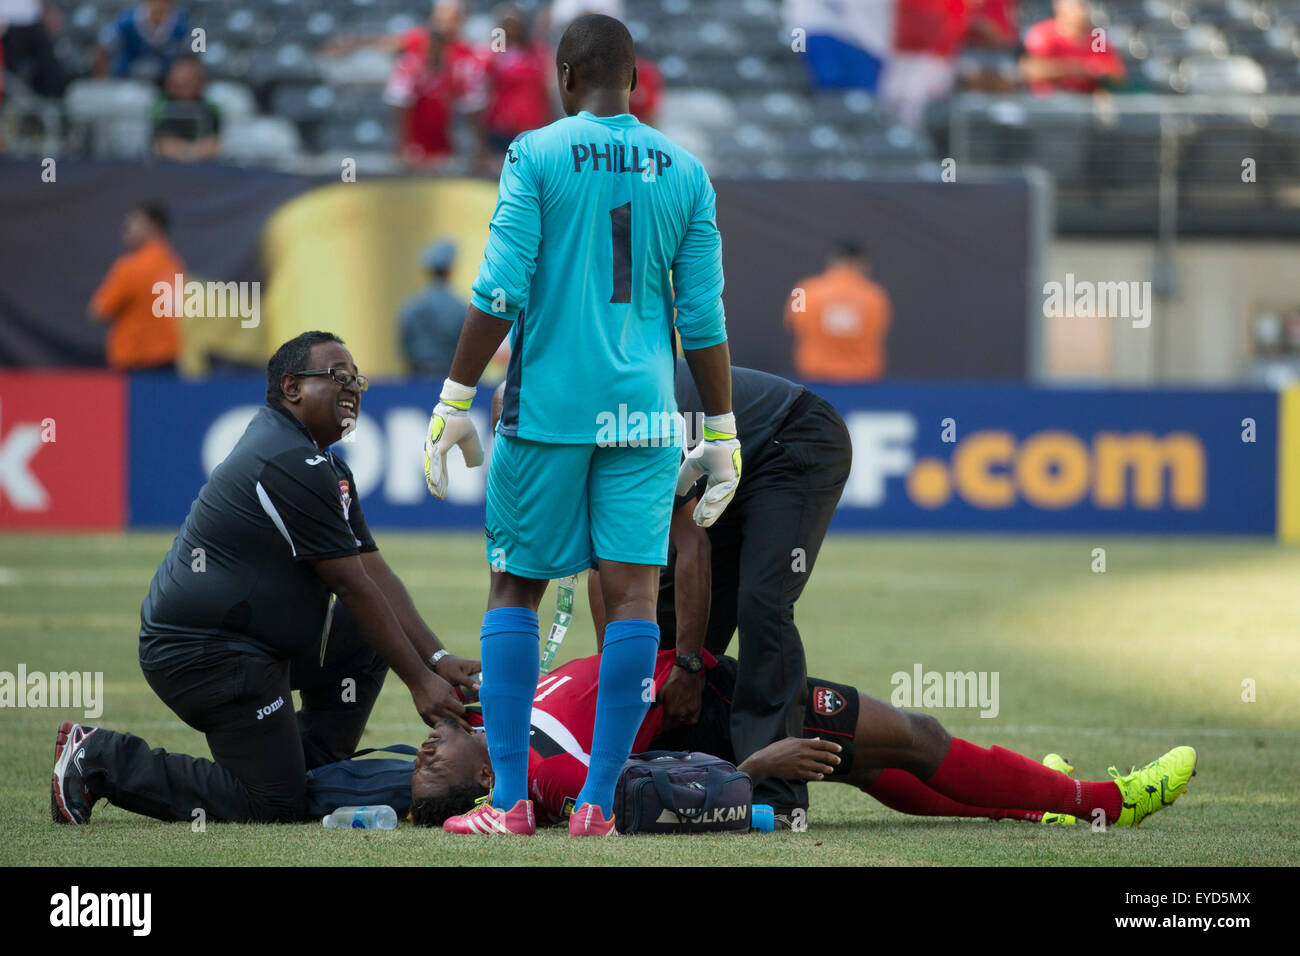 The Match By Shootout. 19th July, 2015. Panama goalkeeper Jaime Penedo (1) talks with the trainer as they work on defense Mekeil Williams (17) during the CONCACAF Gold Cup 2015 Quarterfinal match between the Trinidad & Tobago and Panama at MetLife Stadium in East Rutherford, New Jersey. Panama won the match by shootout. (Christopher Szagola/Cal Sport Media) © csm/Alamy Live News Stock Photo